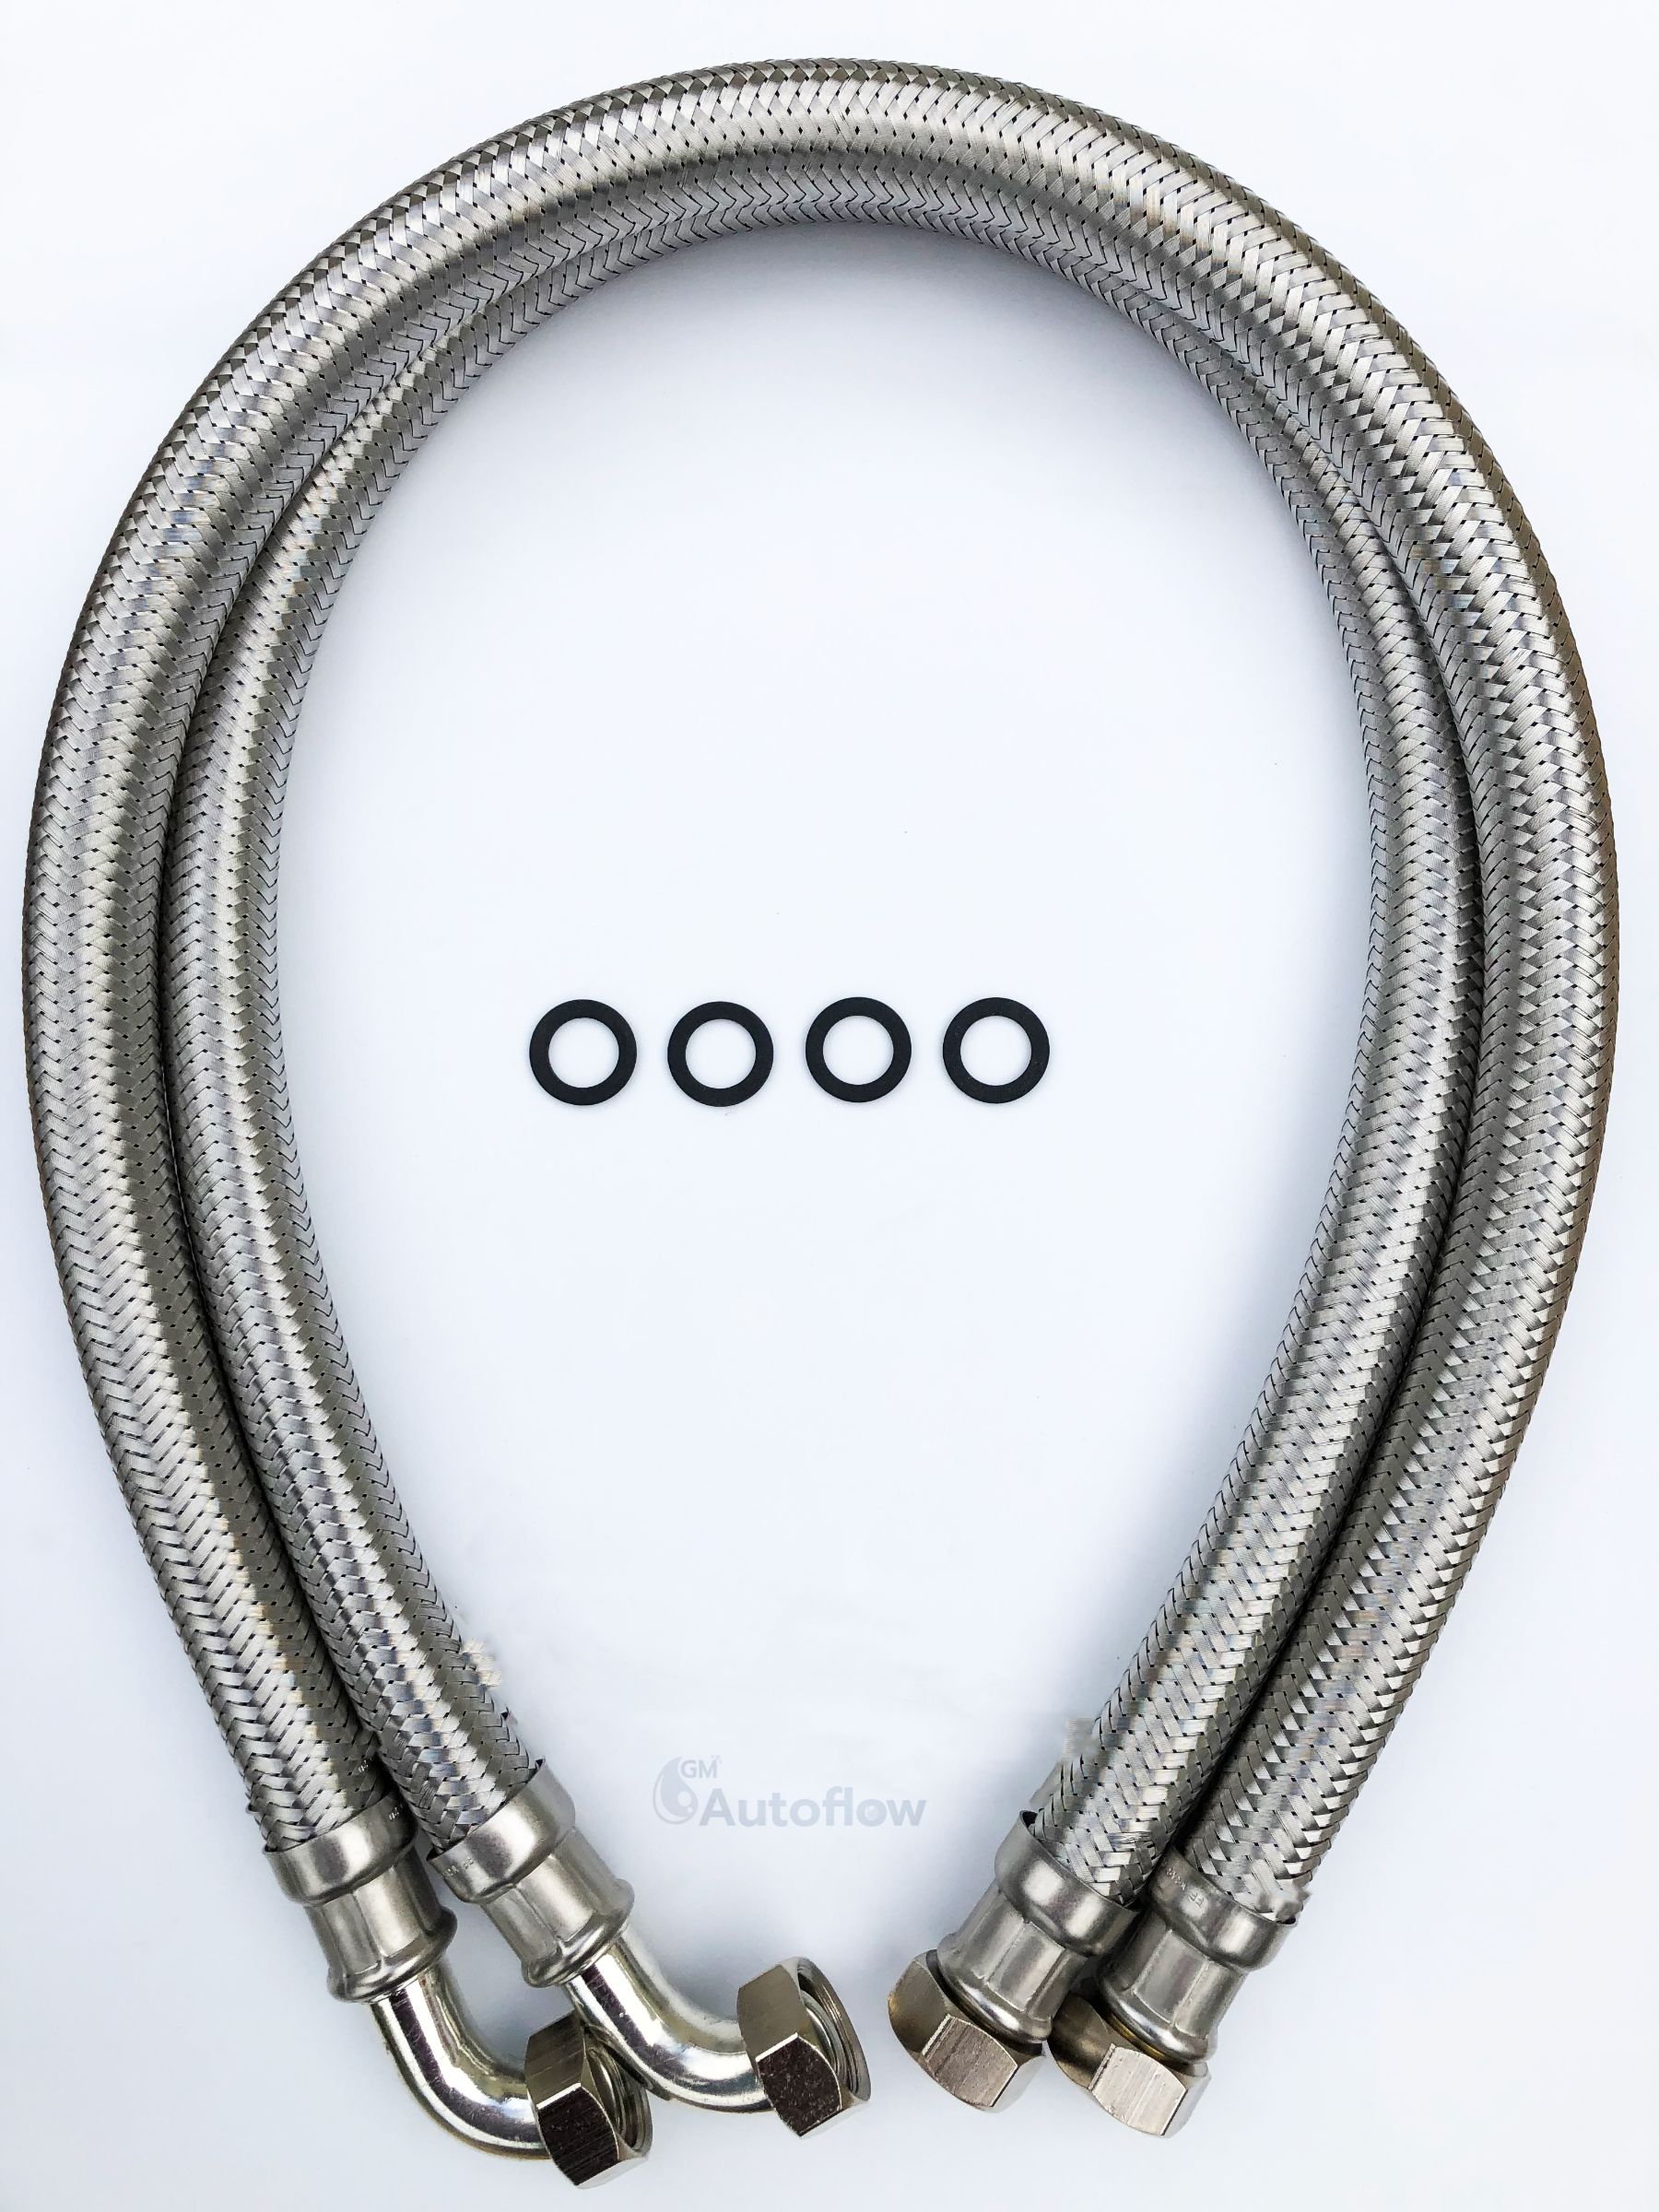 22mm Stainless Steel Hoses, 1000mm long Pair AF714 - WRAS APPROVED